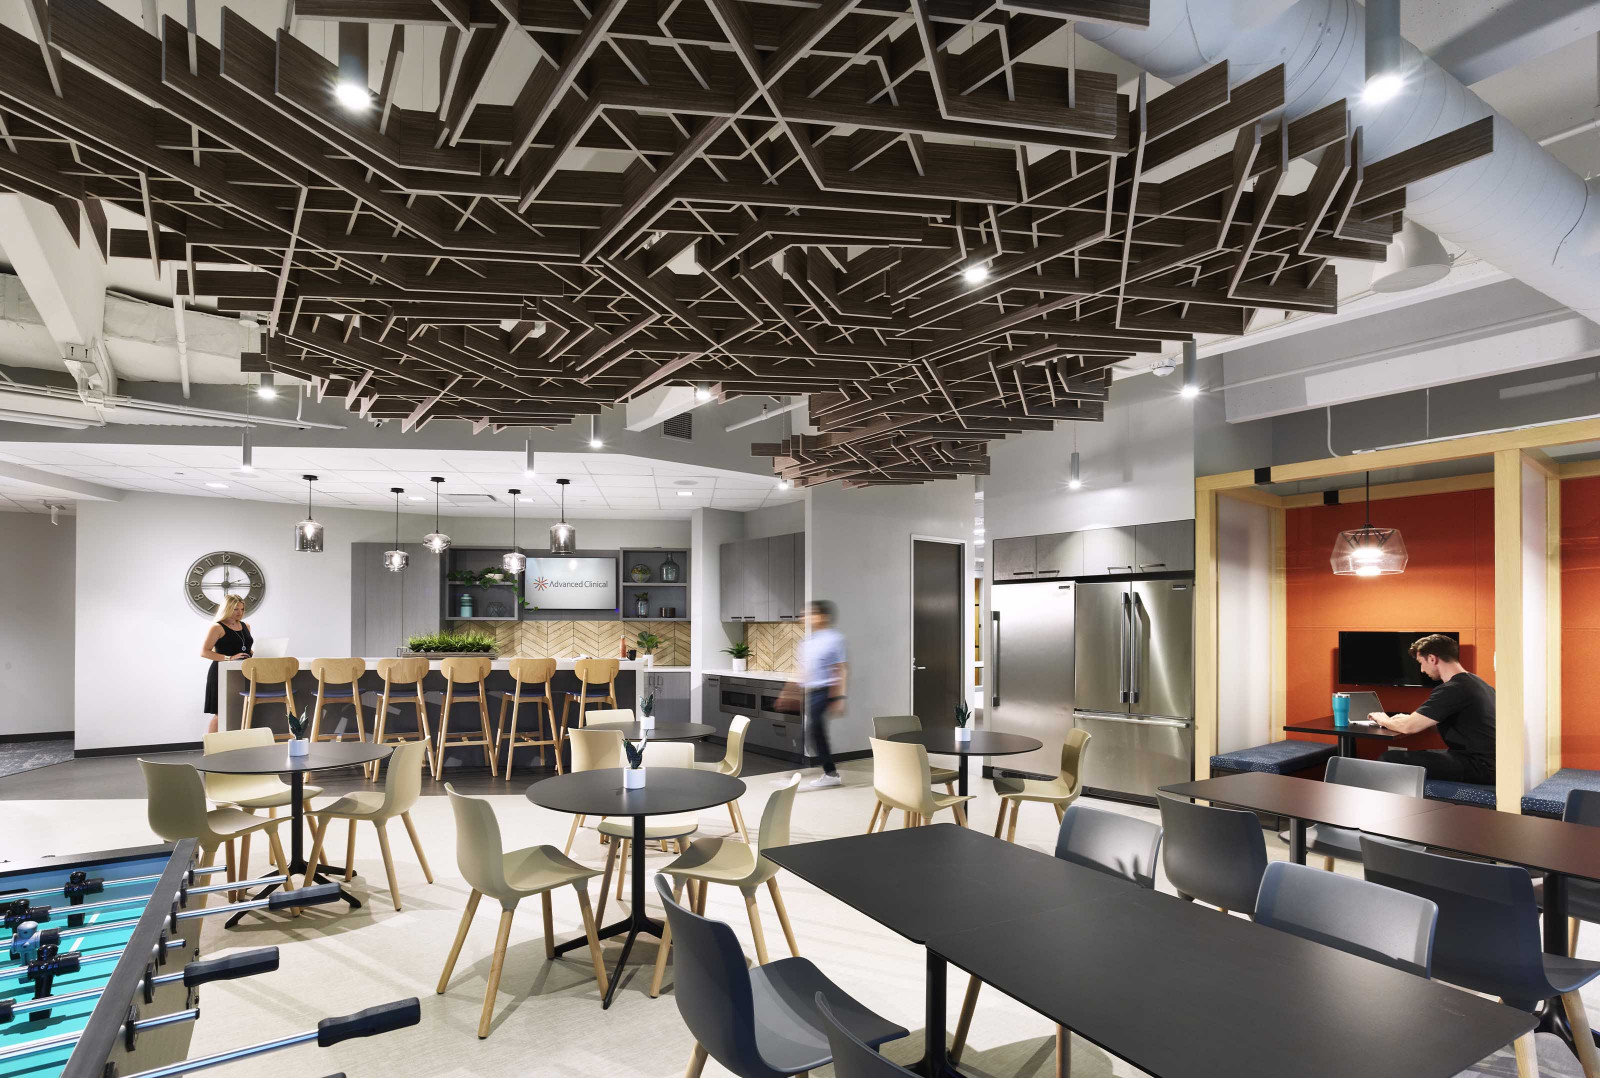 A breakroom at the Carlyle Amenity Center, featuring several booths on the right-hand side, several black tables in the center, a foosball table on the left and a small kitchen in the back. SoftGrid Flux panels with a wood texture are hanging from the ceiling.